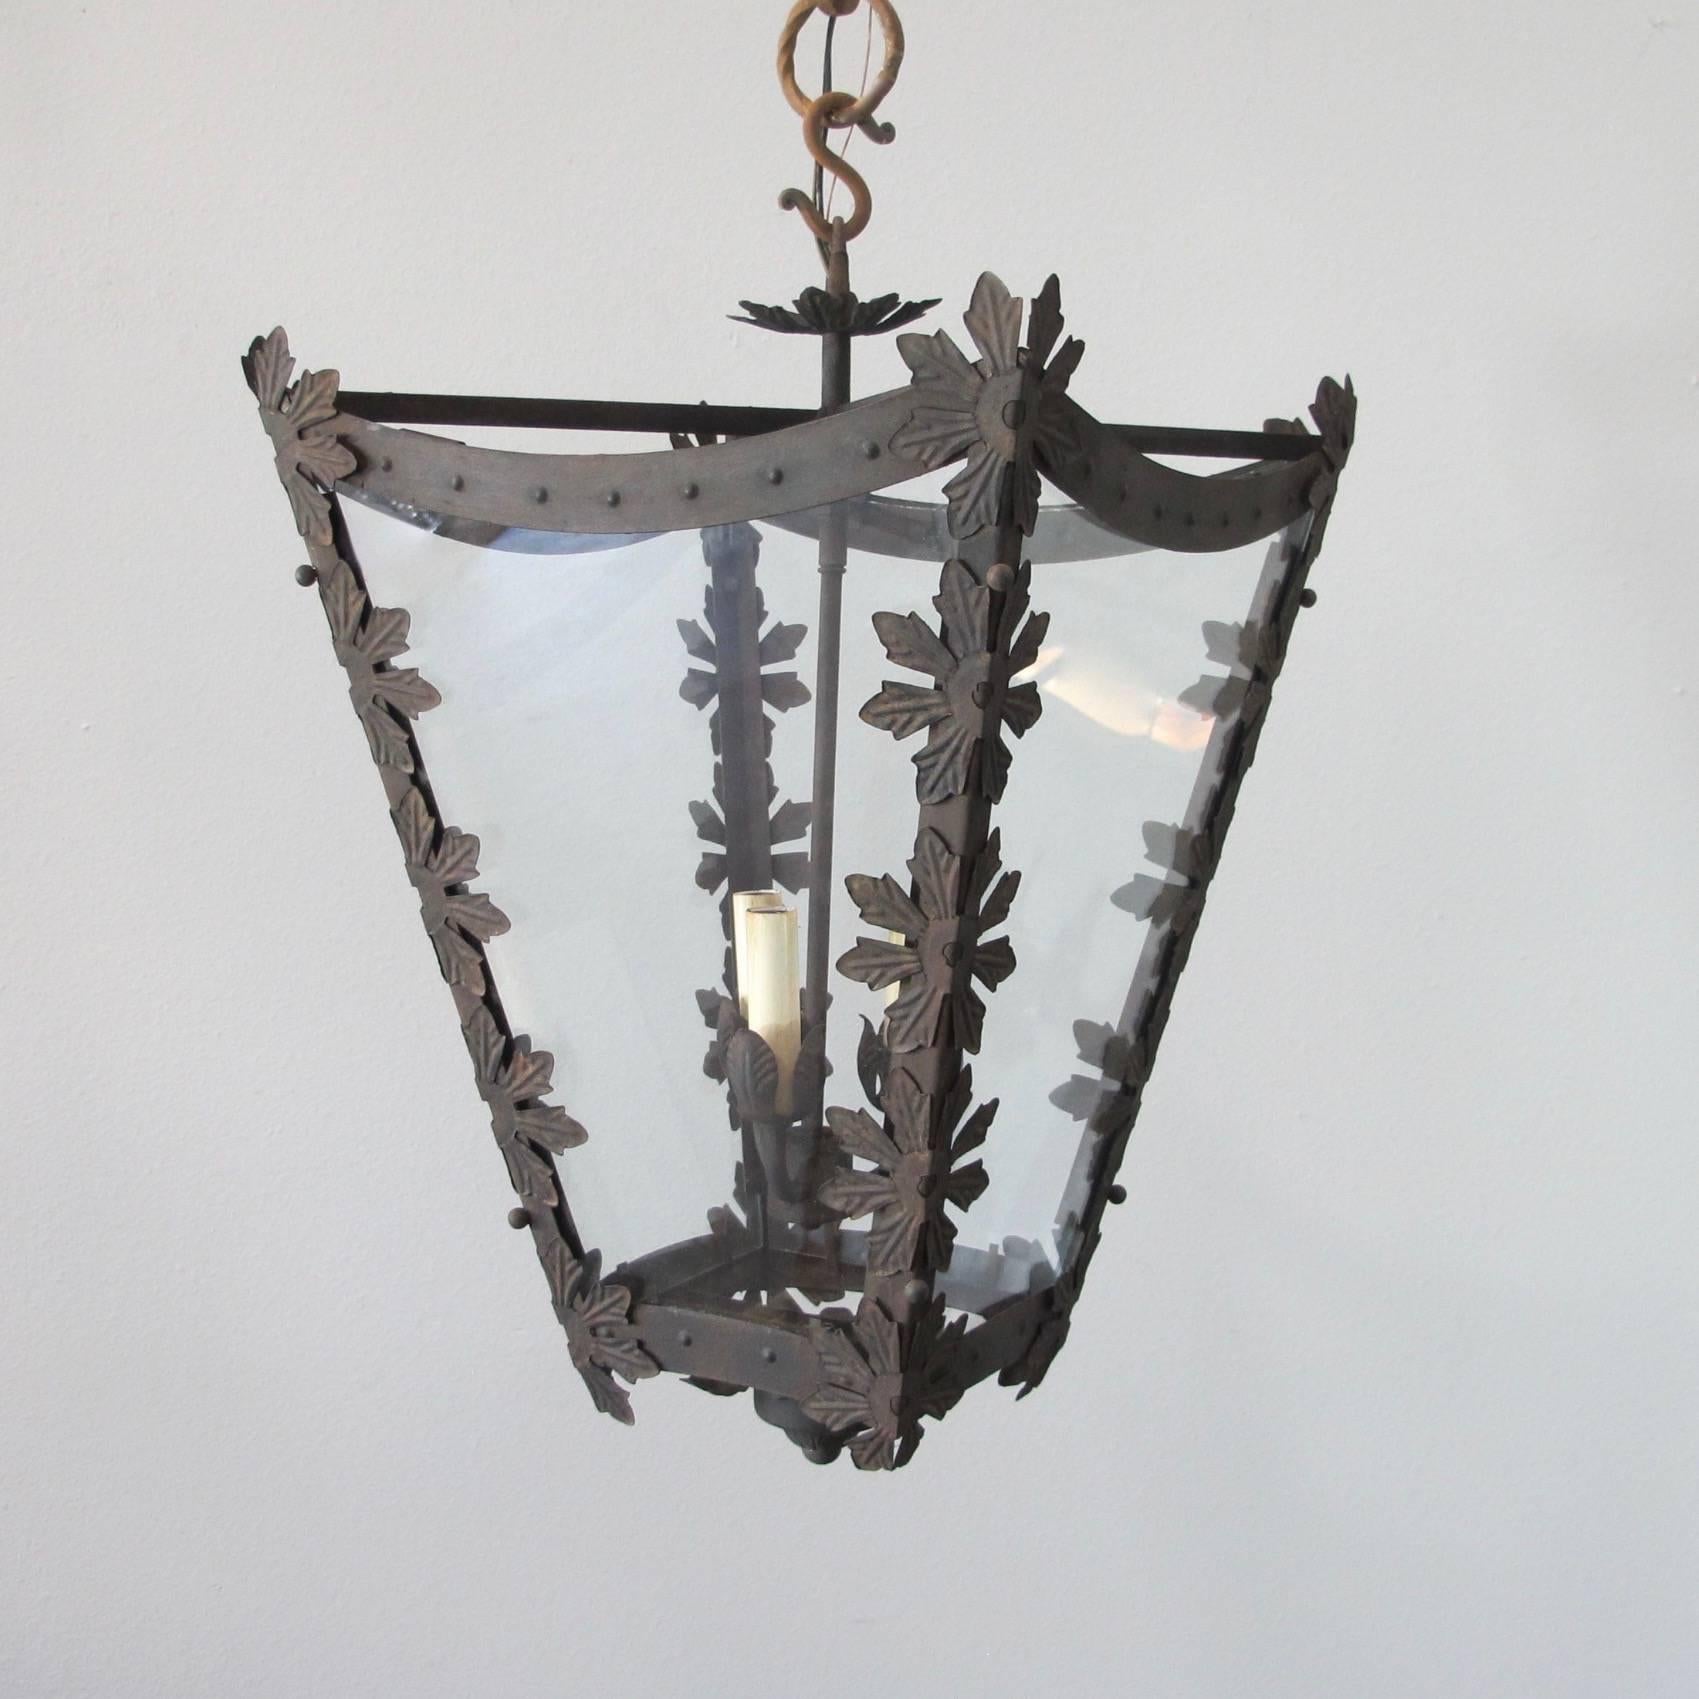 Contemporary Vintage Iron Pendant with Floral Details